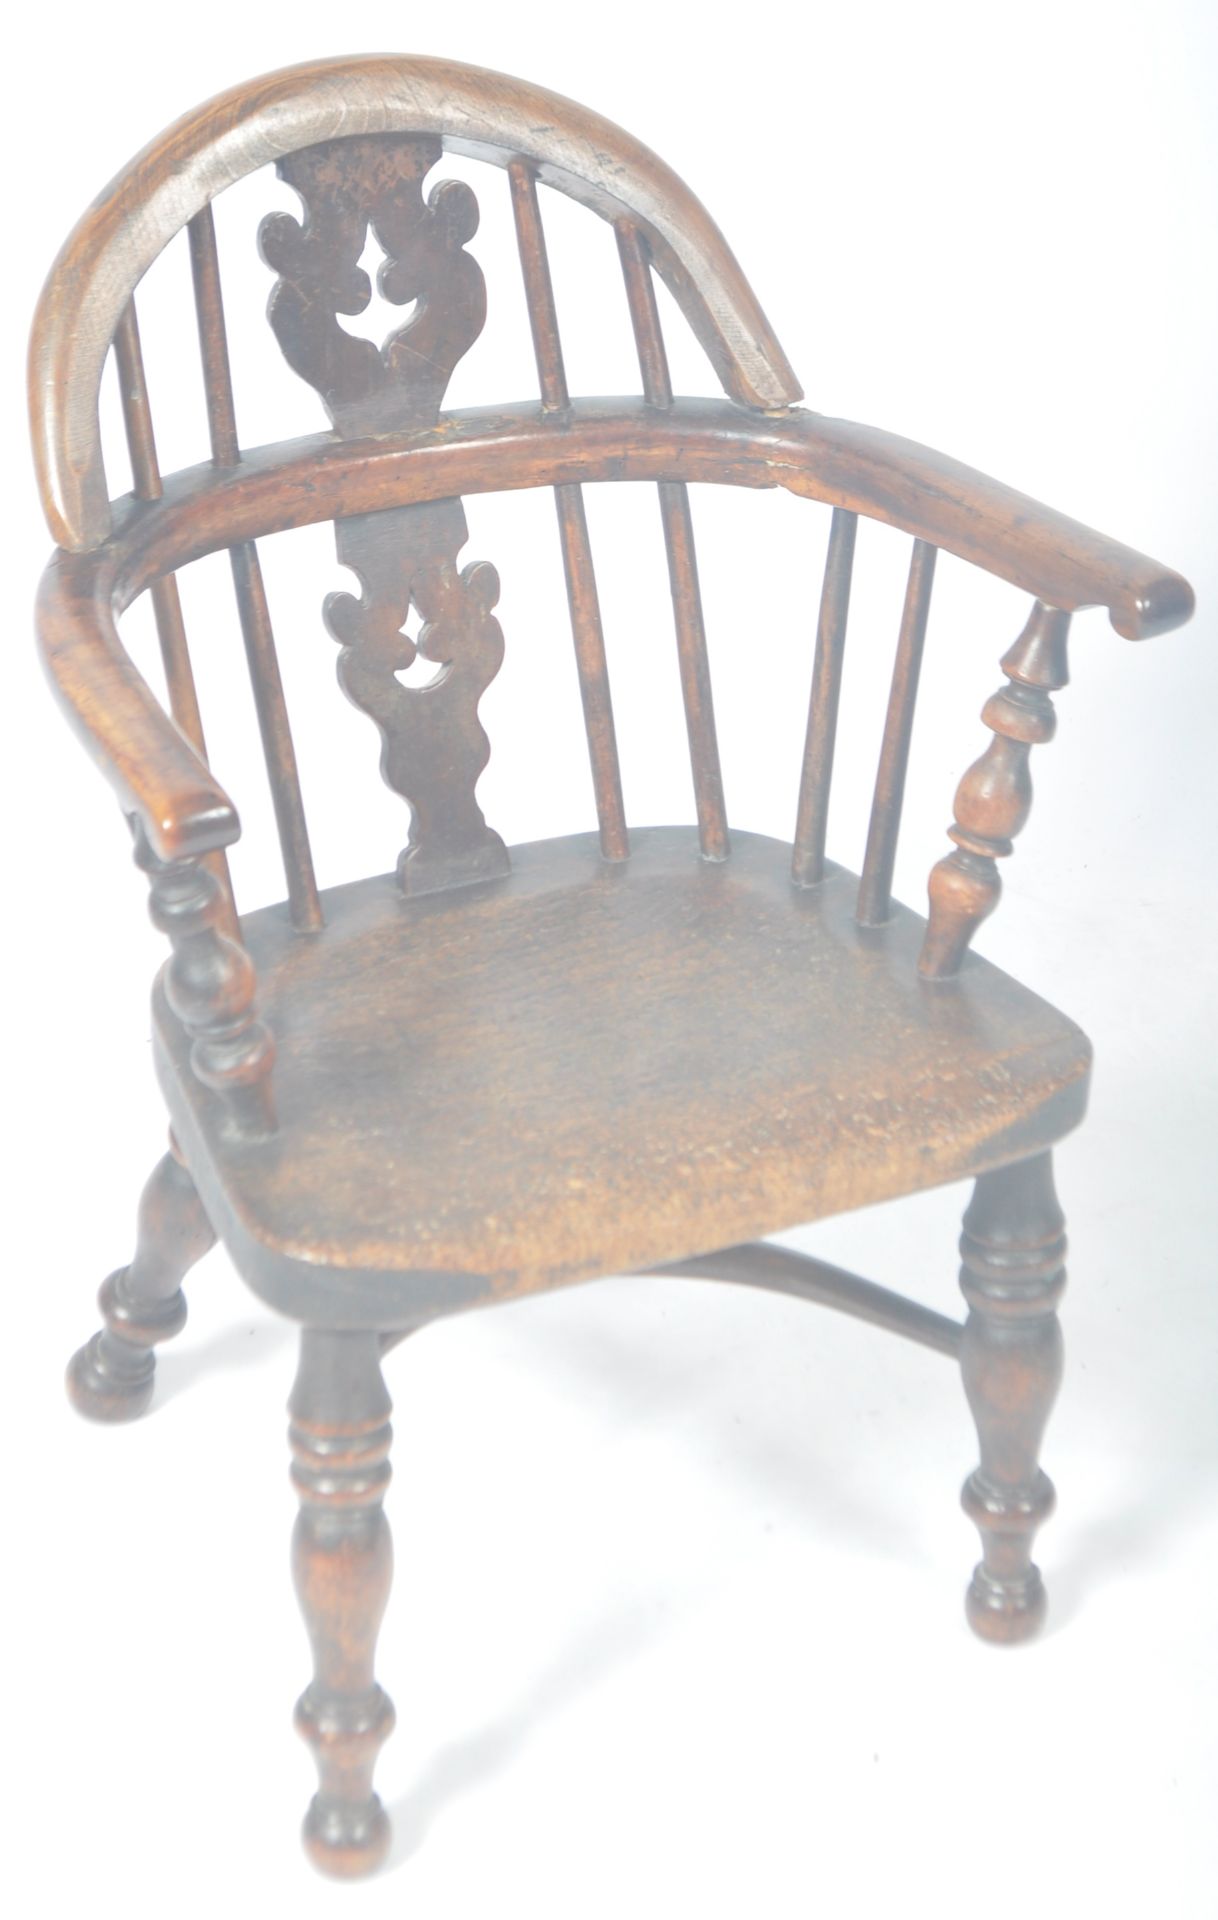 RARE ANTIQUE COUNTRY HOUSE YEW AND ELM CHILDS WINDSOR CHAIR - Image 3 of 8